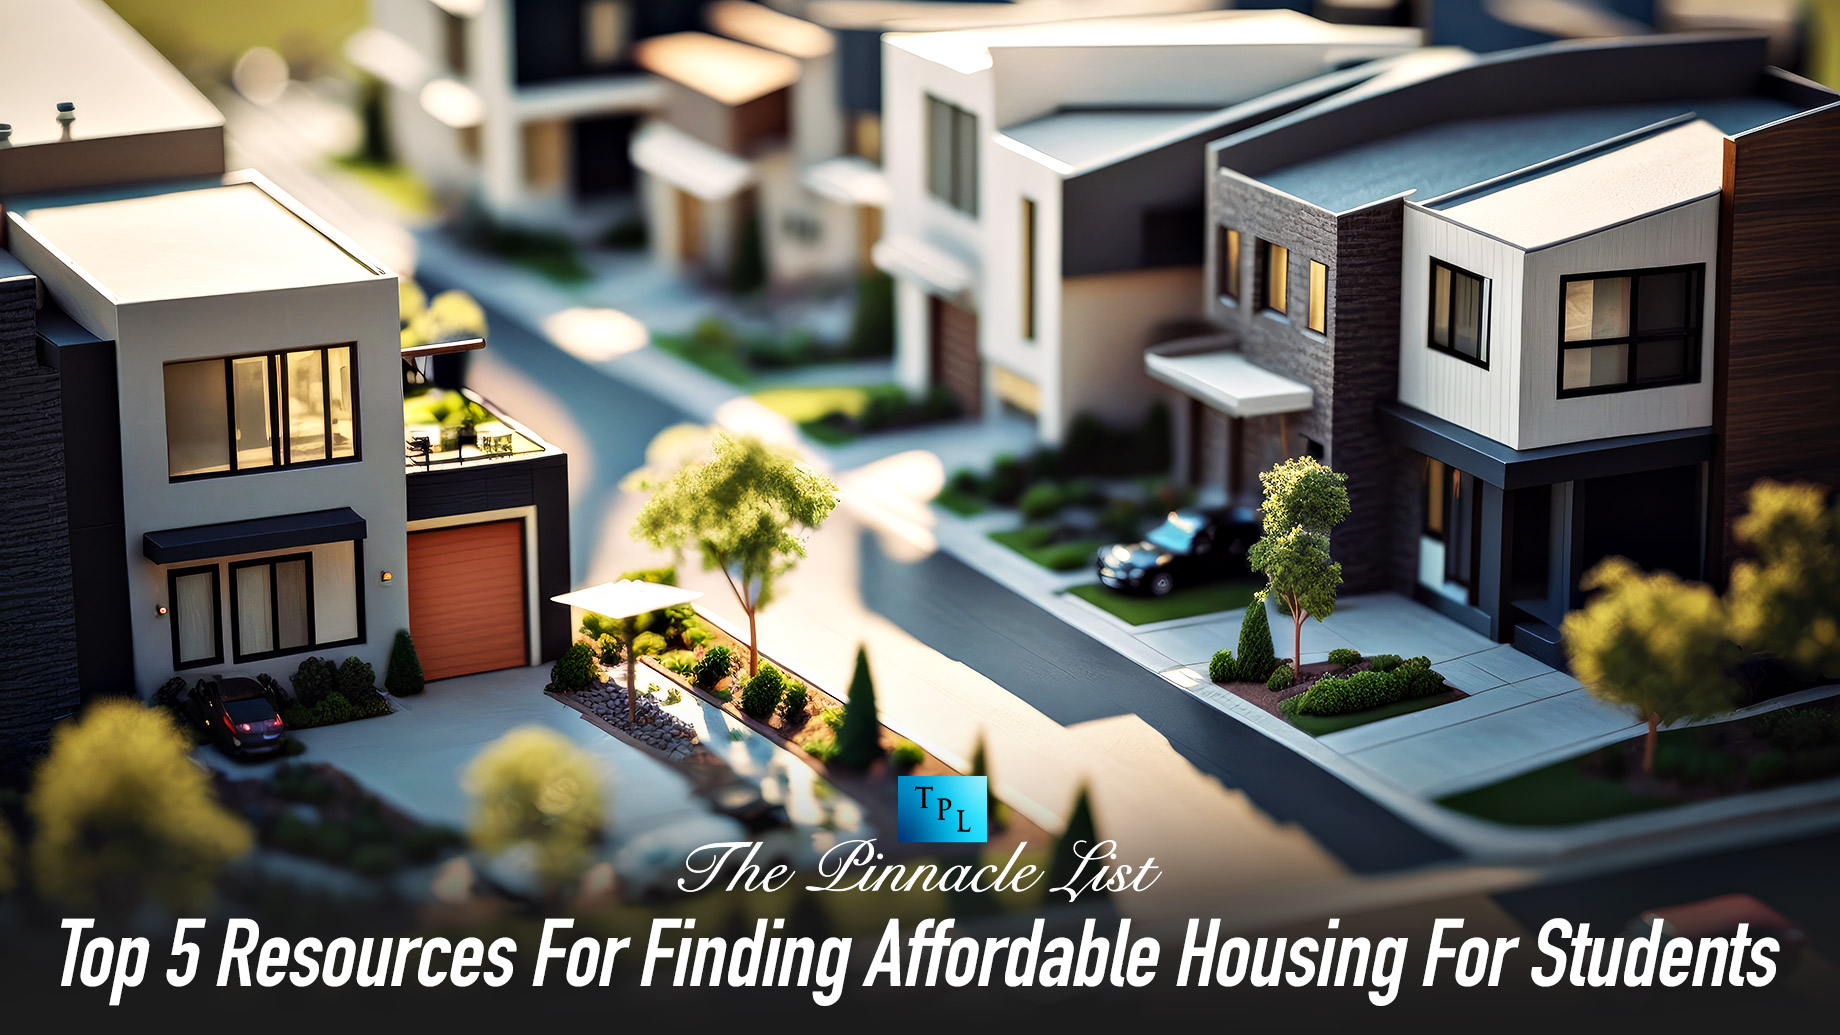 Top 5 Resources For Finding Affordable Housing For Students